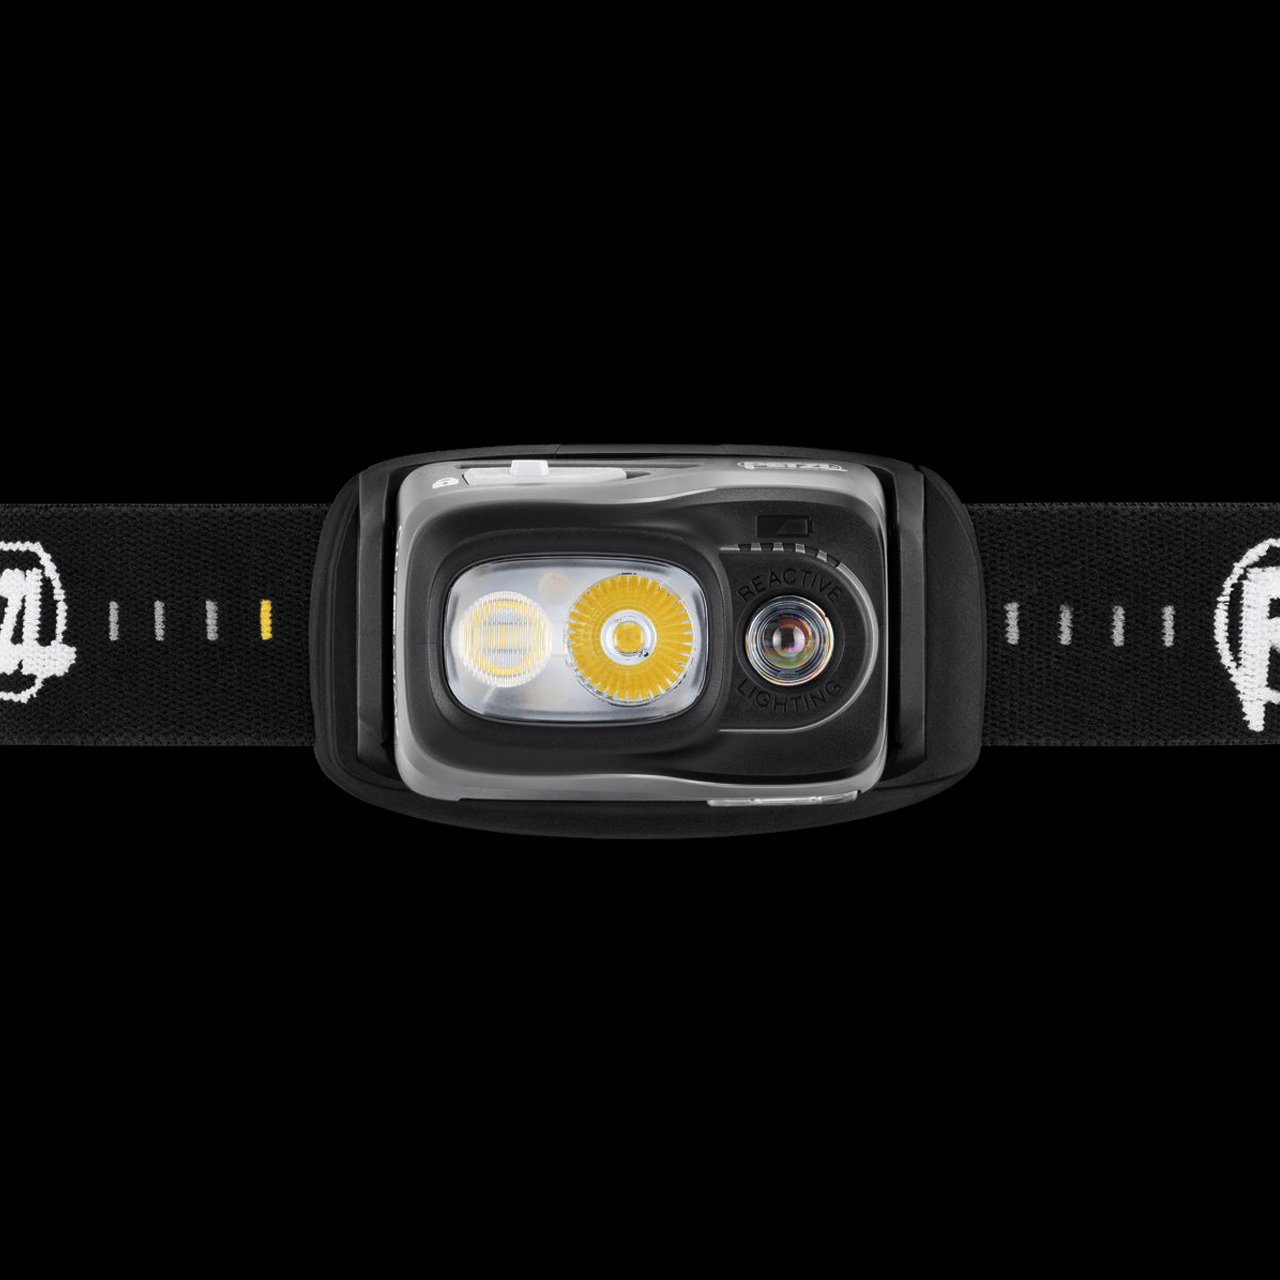 Petzl releases a new headlamp, the SWIFT RL PRO, 2020-01-24